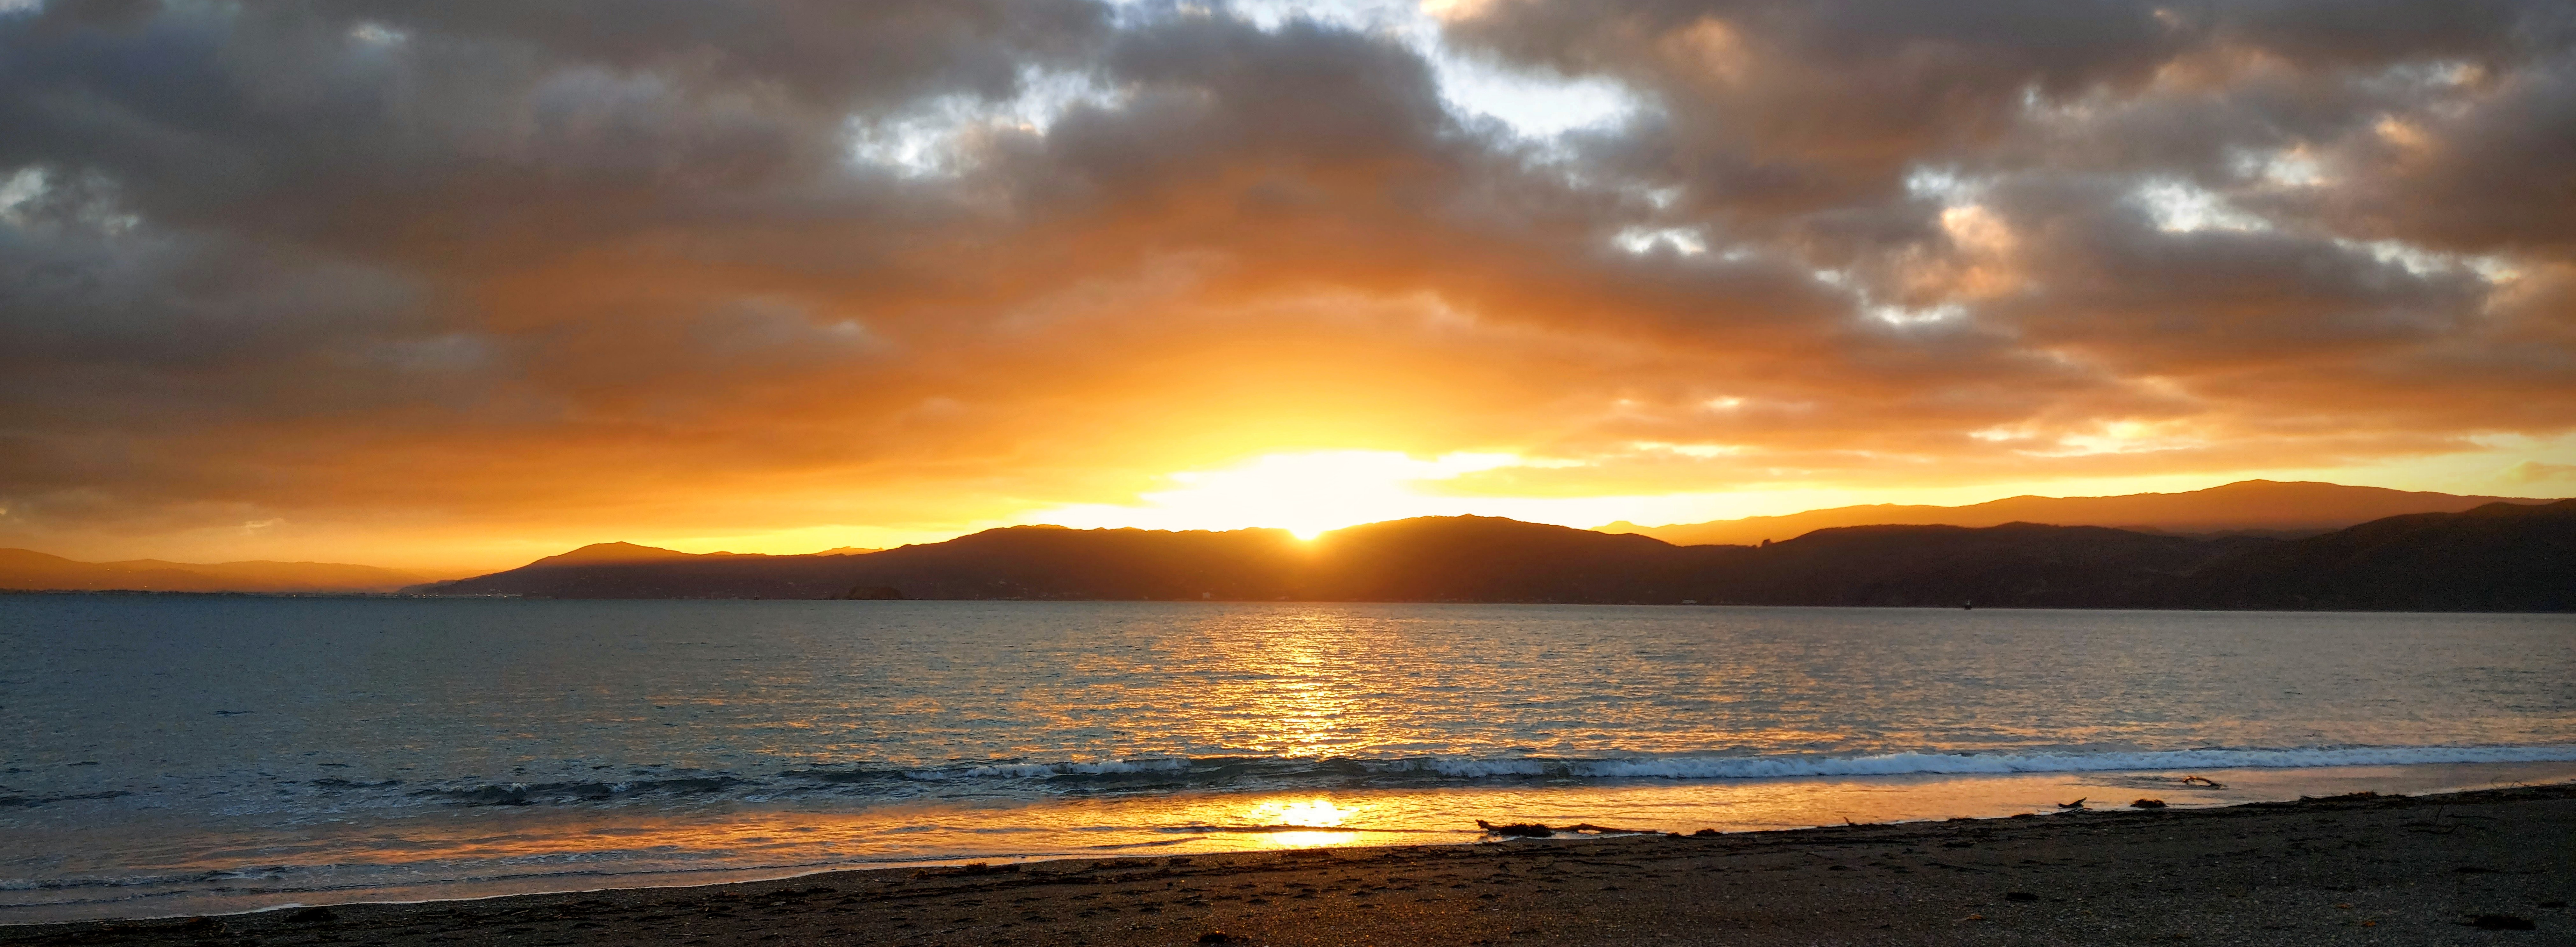 Sunrise over the distant Wellington harbour hills as seen from Seaton Beach, lighting up the clouds with amber and reflecting in the calm waters